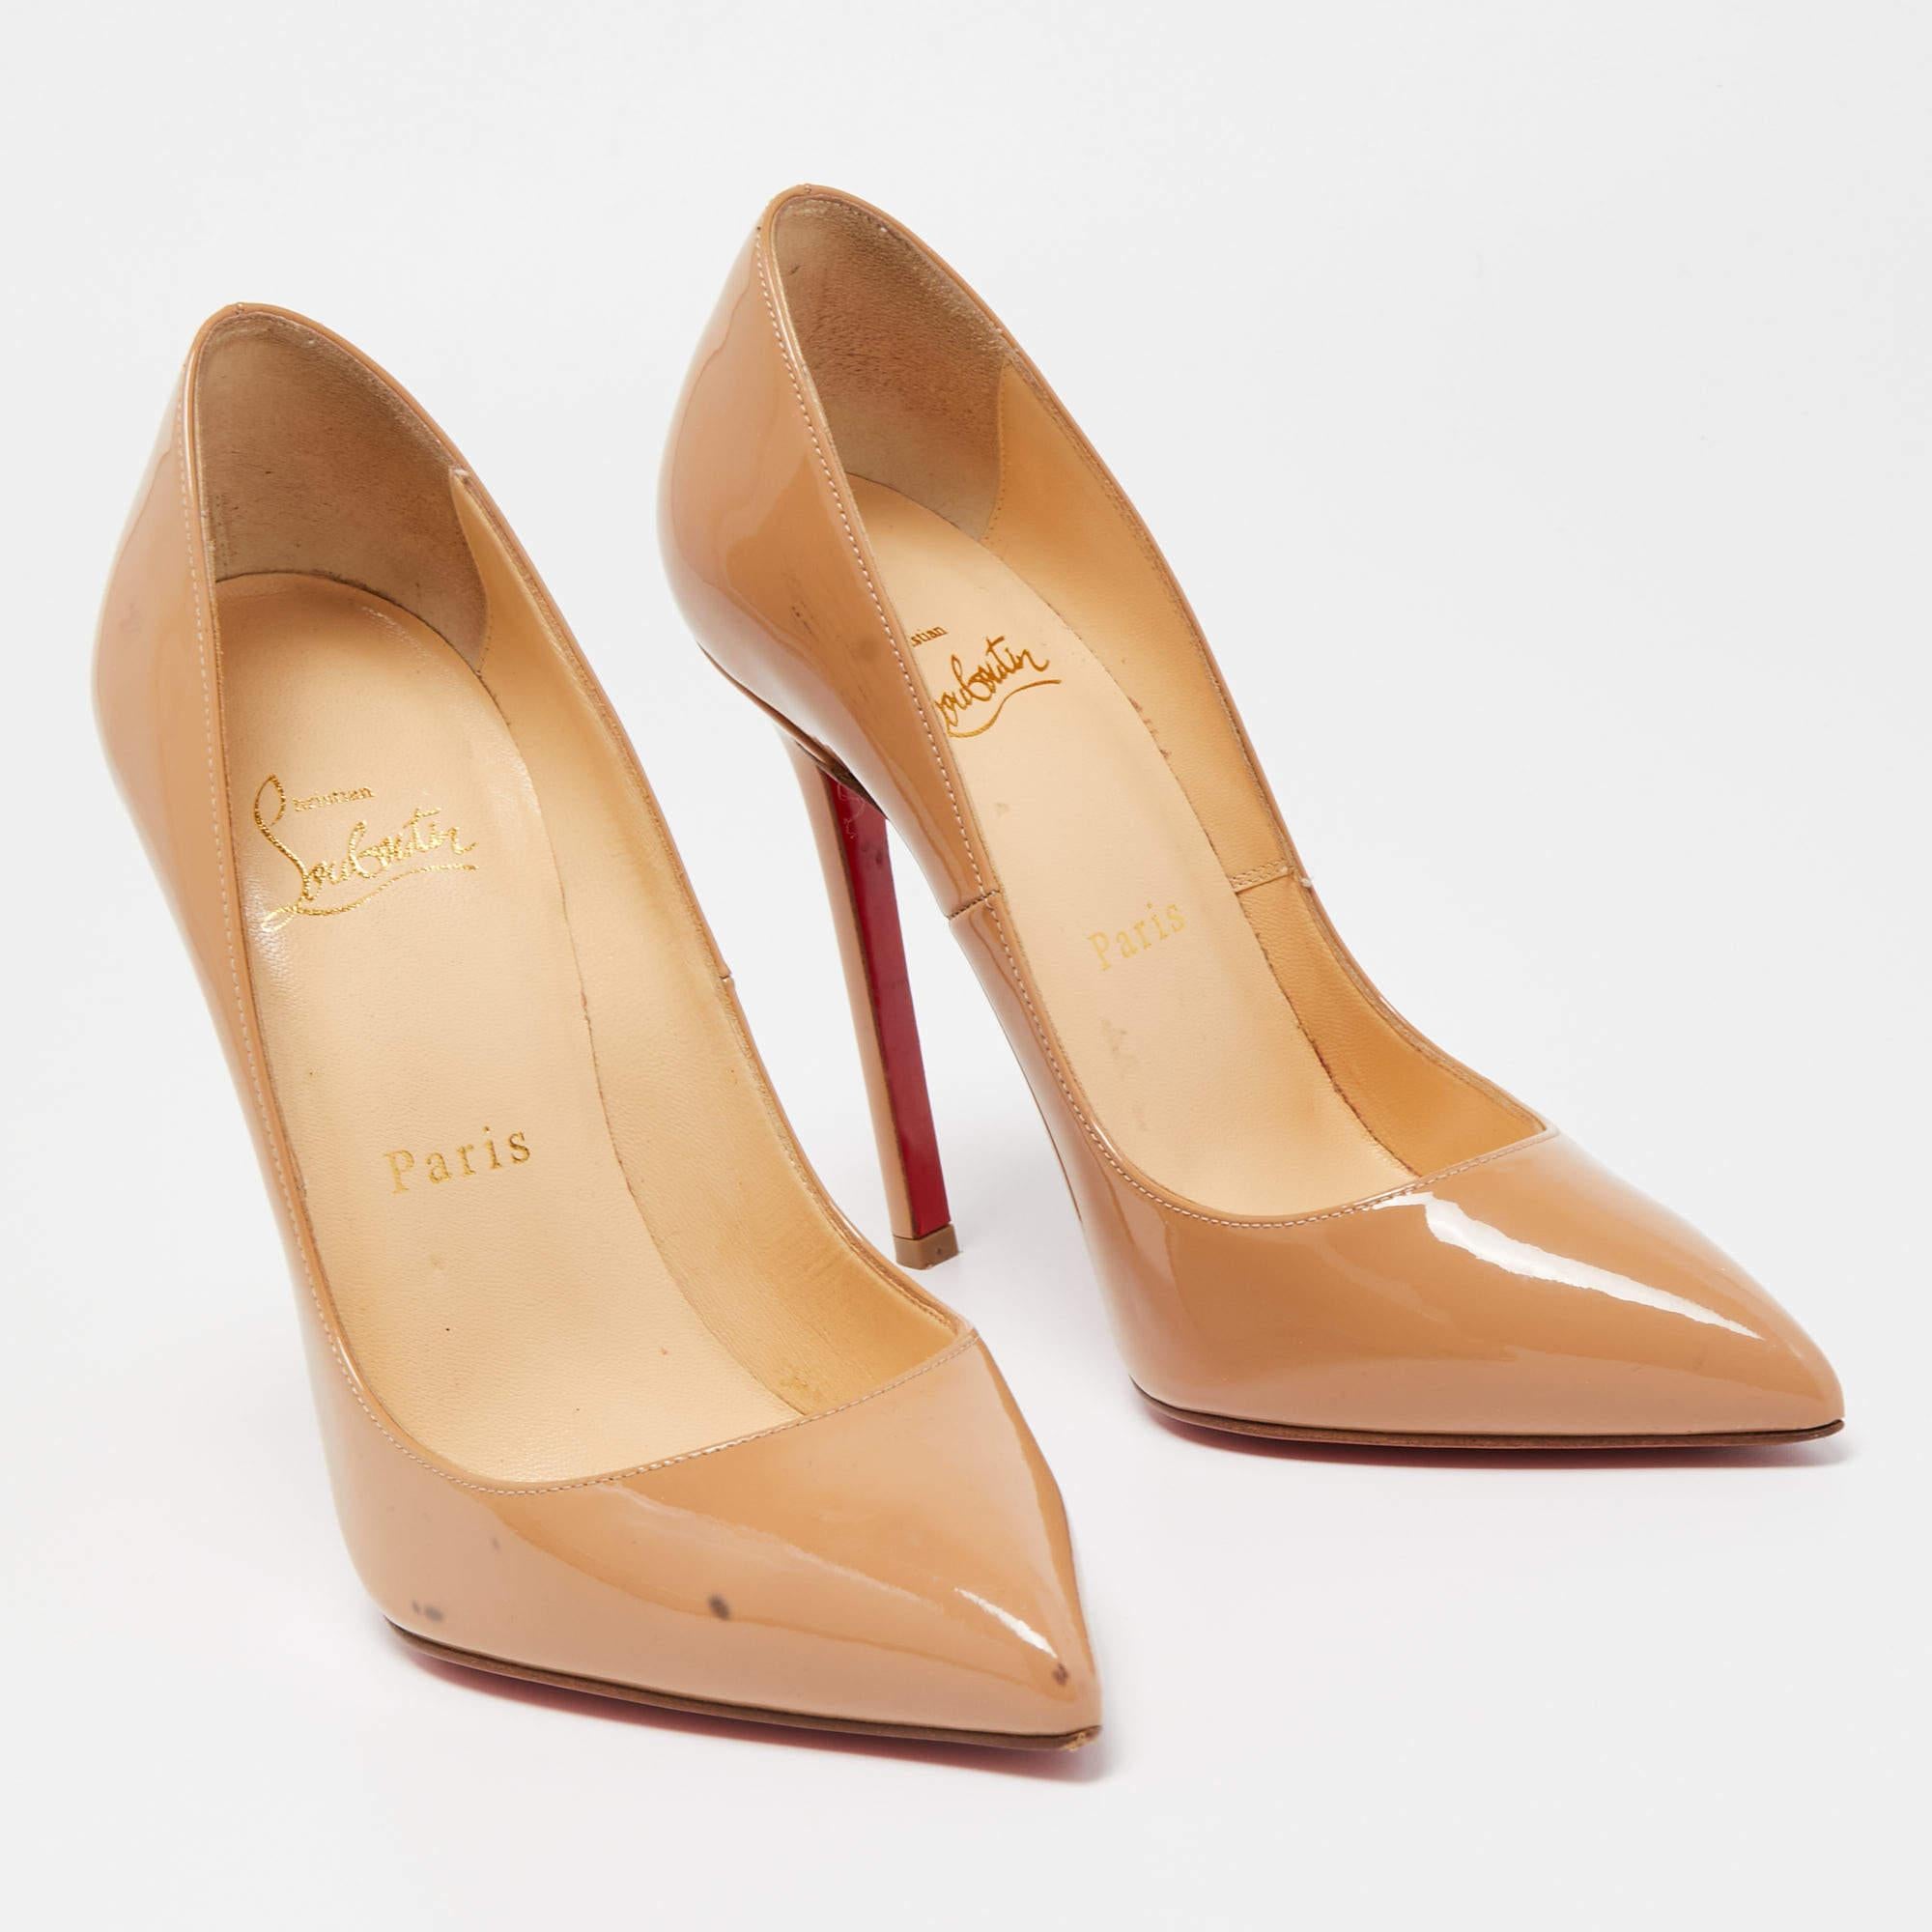 Christian Louboutin Beige Patent Leather So Kate Pointed Toe Pumps Size 37.5 In Good Condition For Sale In Dubai, Al Qouz 2